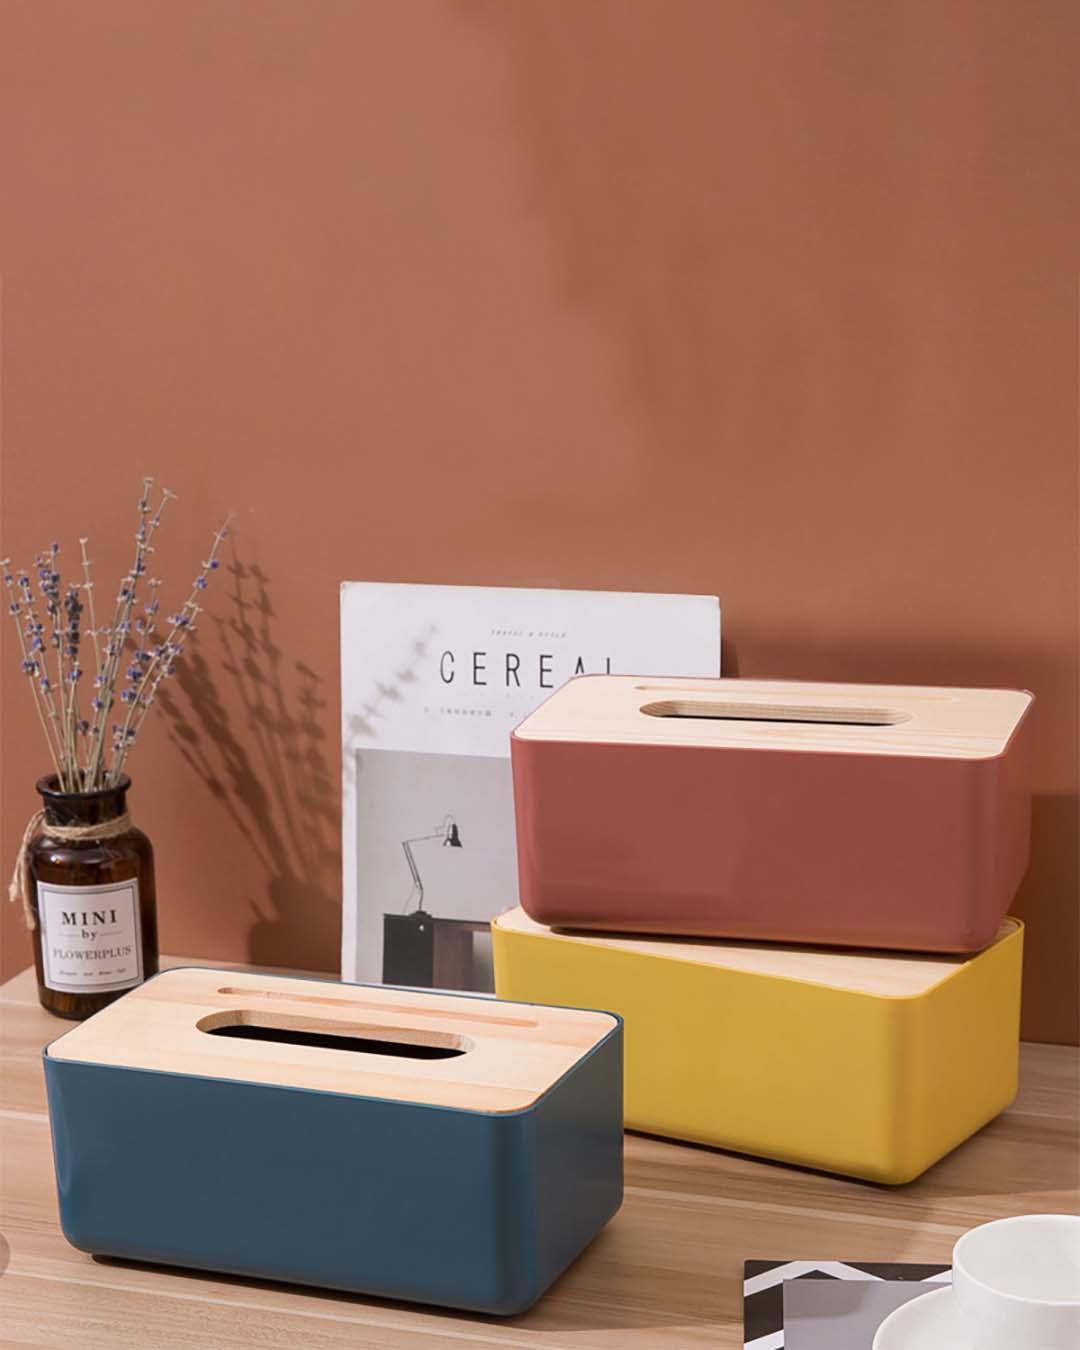 Textured Tissue Box with Lid, Yellow, Plastic - MARKET 99